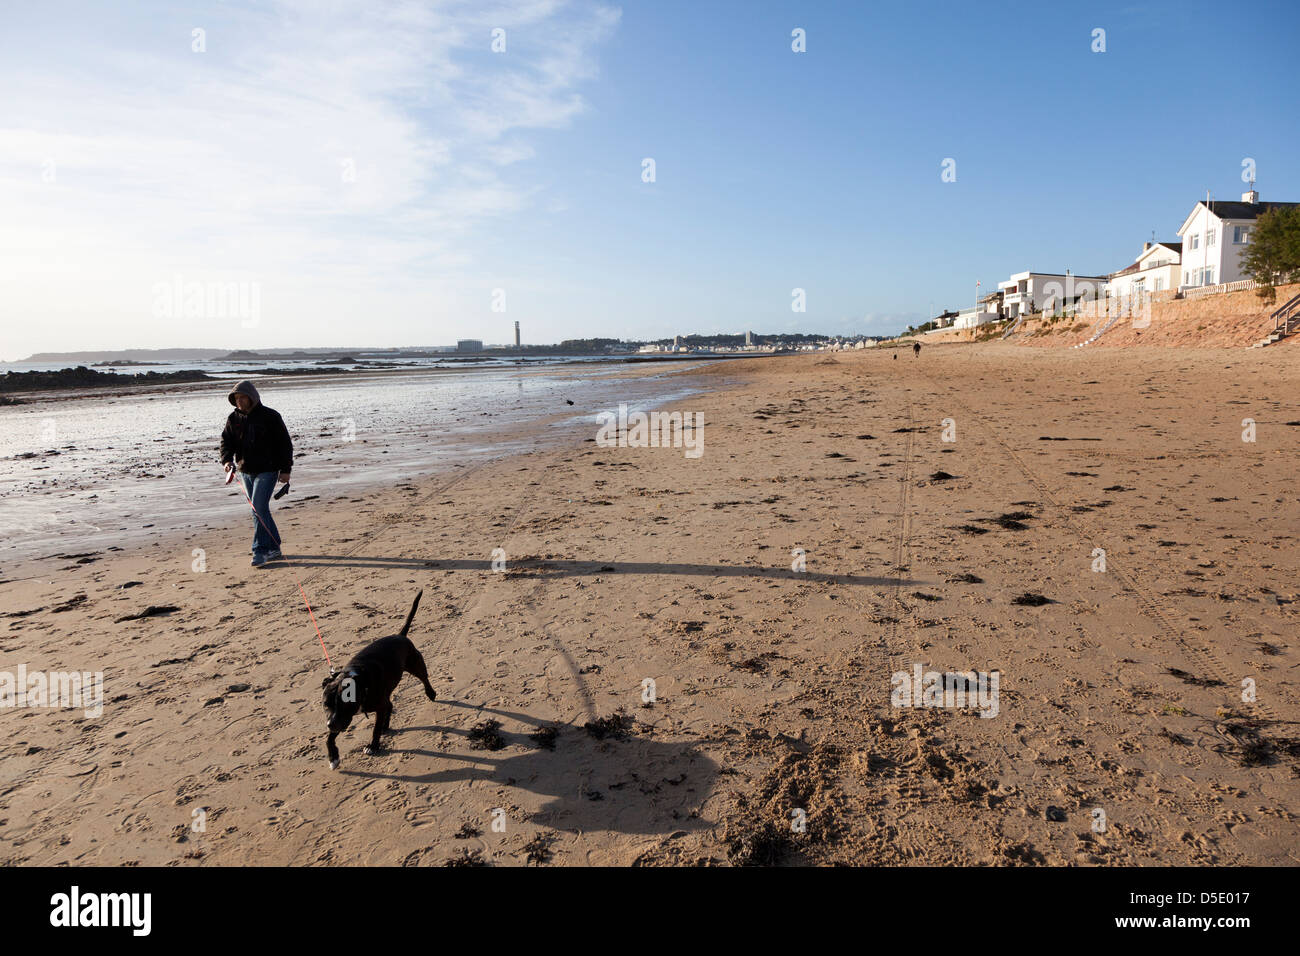 Man walking dog on well used beach with tire tracks and footprints, St Helier, Channel Islands, UK Stock Photo